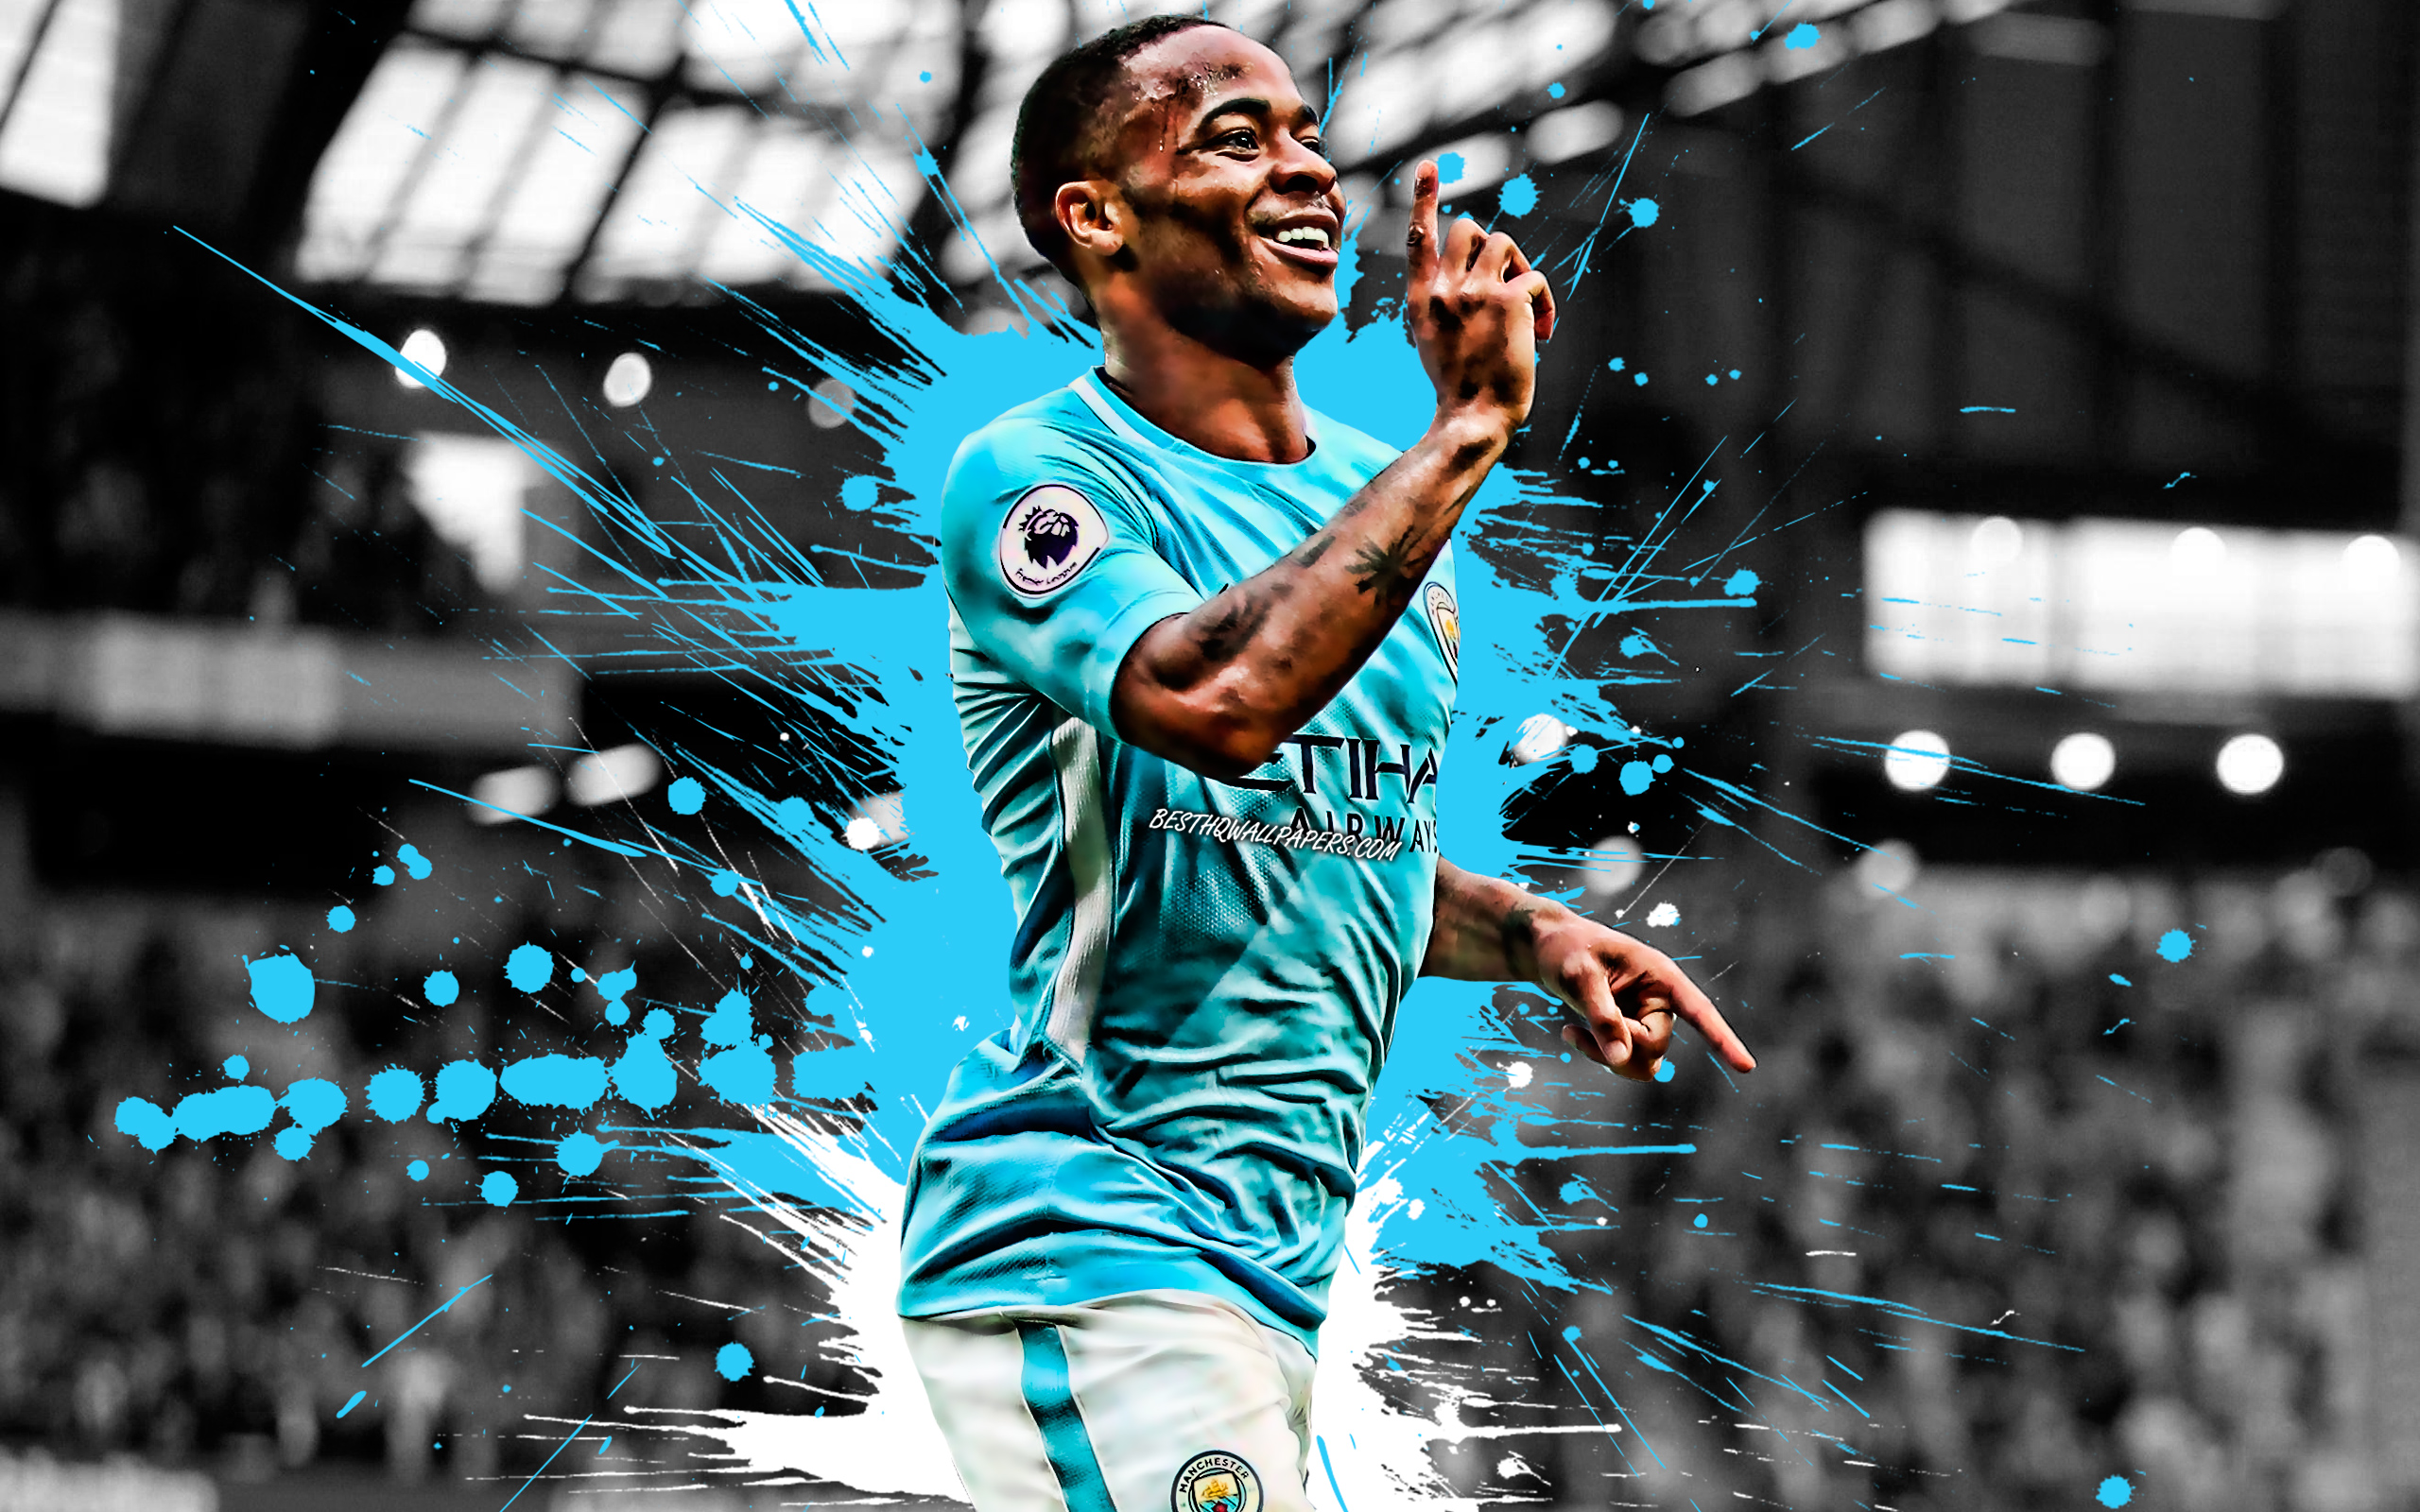 Sterling Manchester City Wallpapers